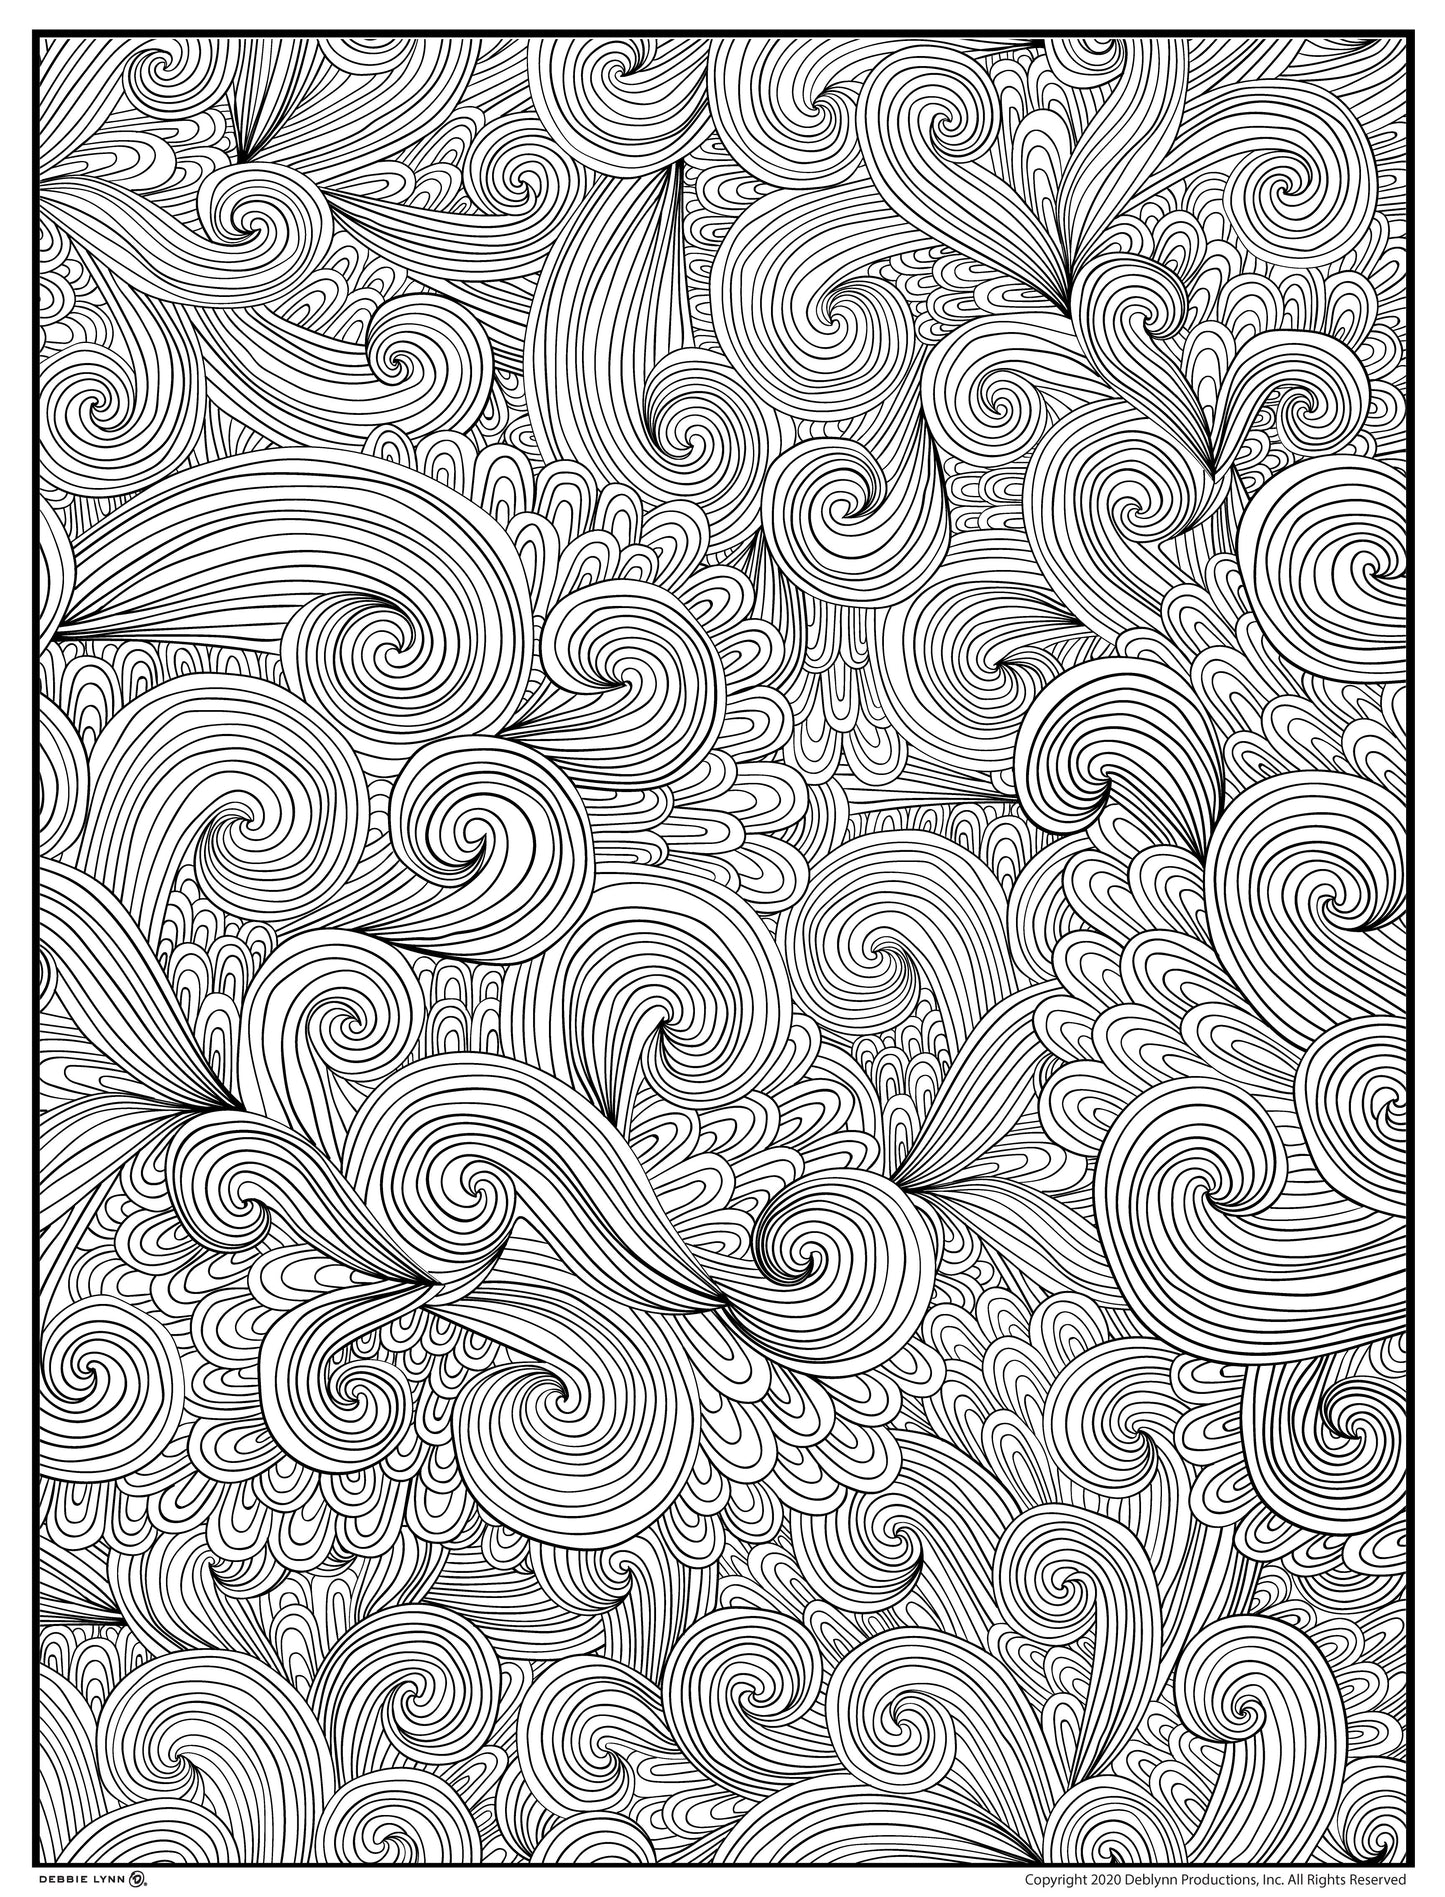 Background 6 Custom Personalized Giant Coloring Poster 46"x60"